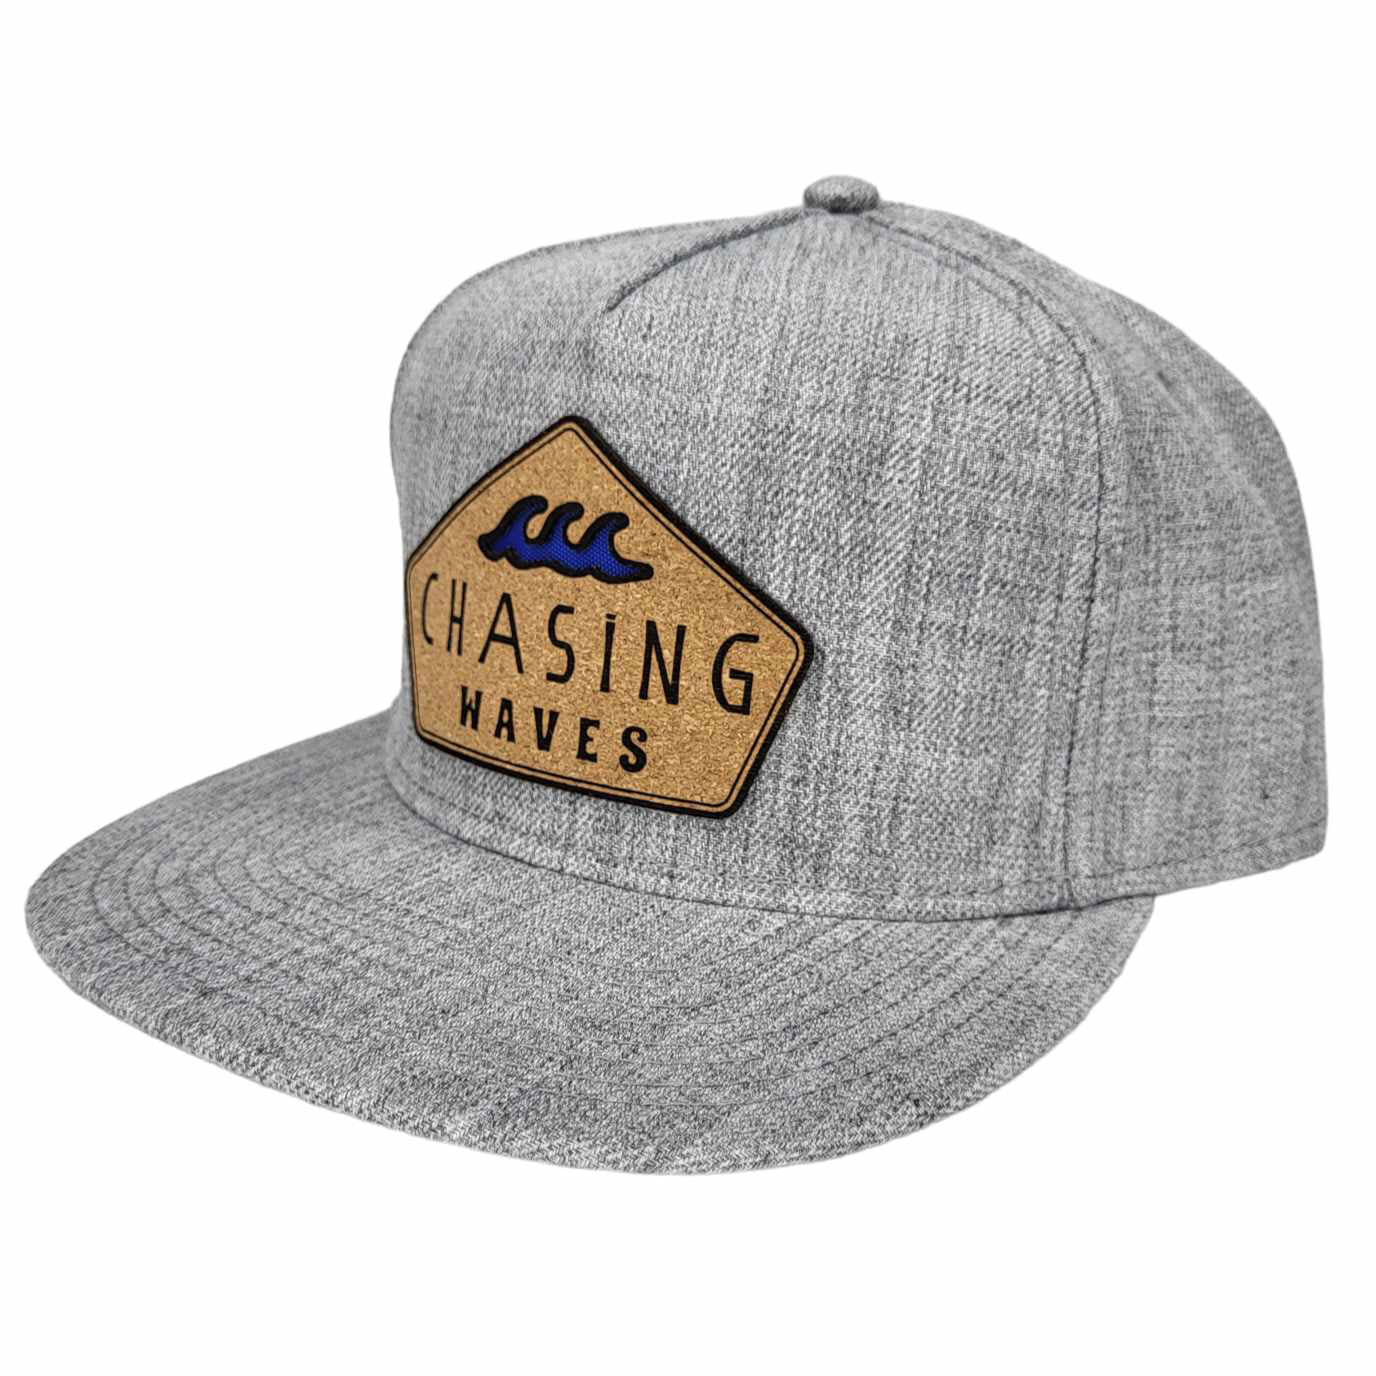 Chasing Waves Cork Patch Hat